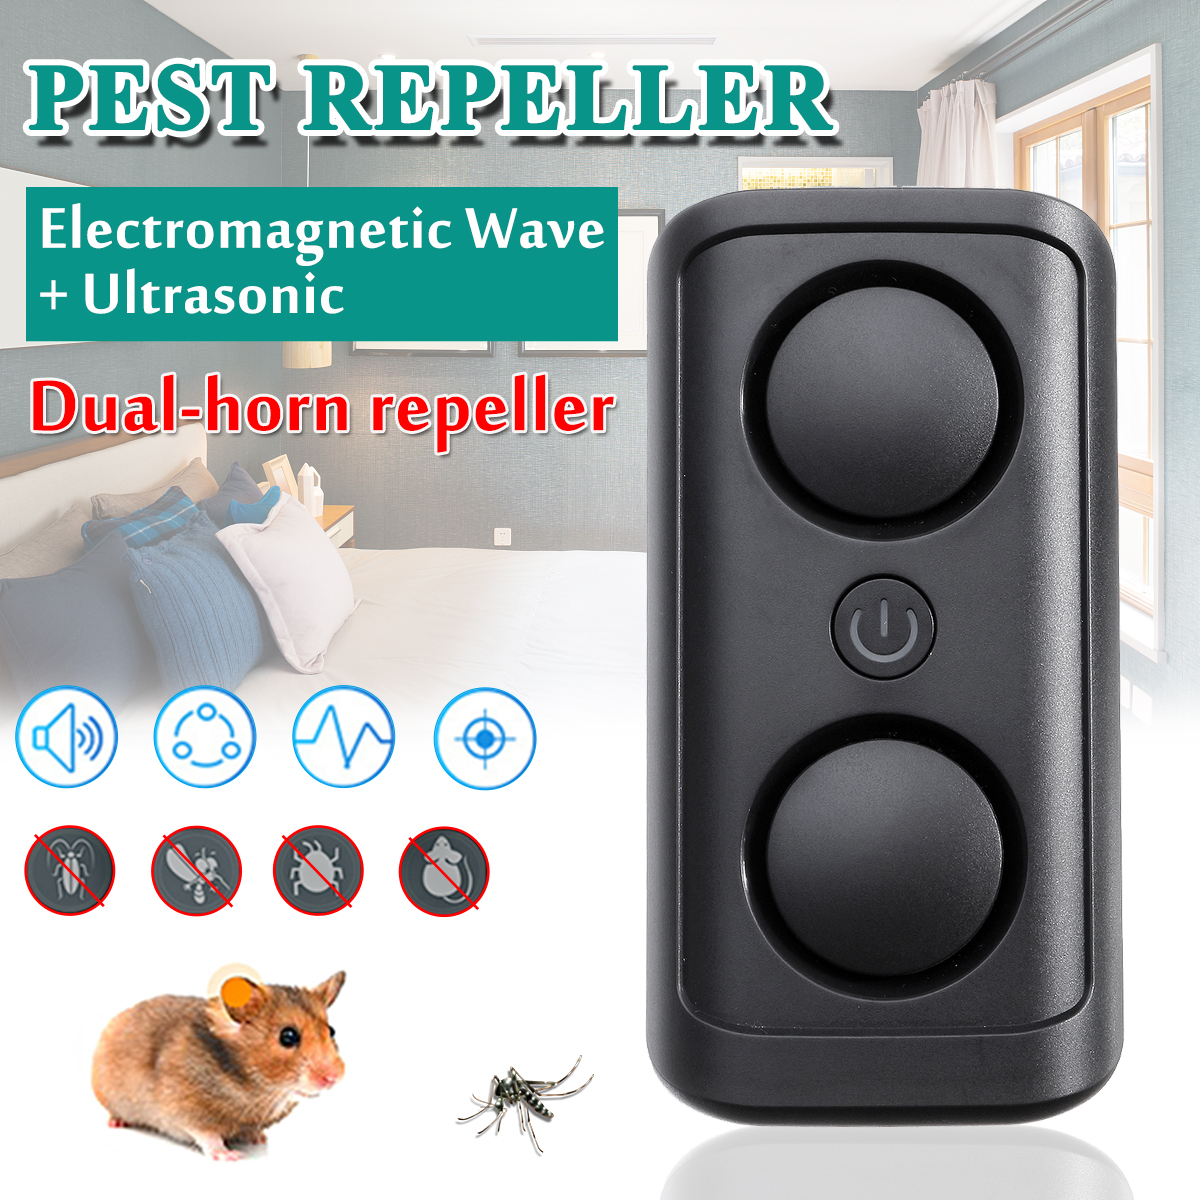 110-230V-High-Power-Dual-Horn-Ultrasonic-Insect-Repellent-Device-Multi-functional-Electromagnetic-Wa-1450415-1